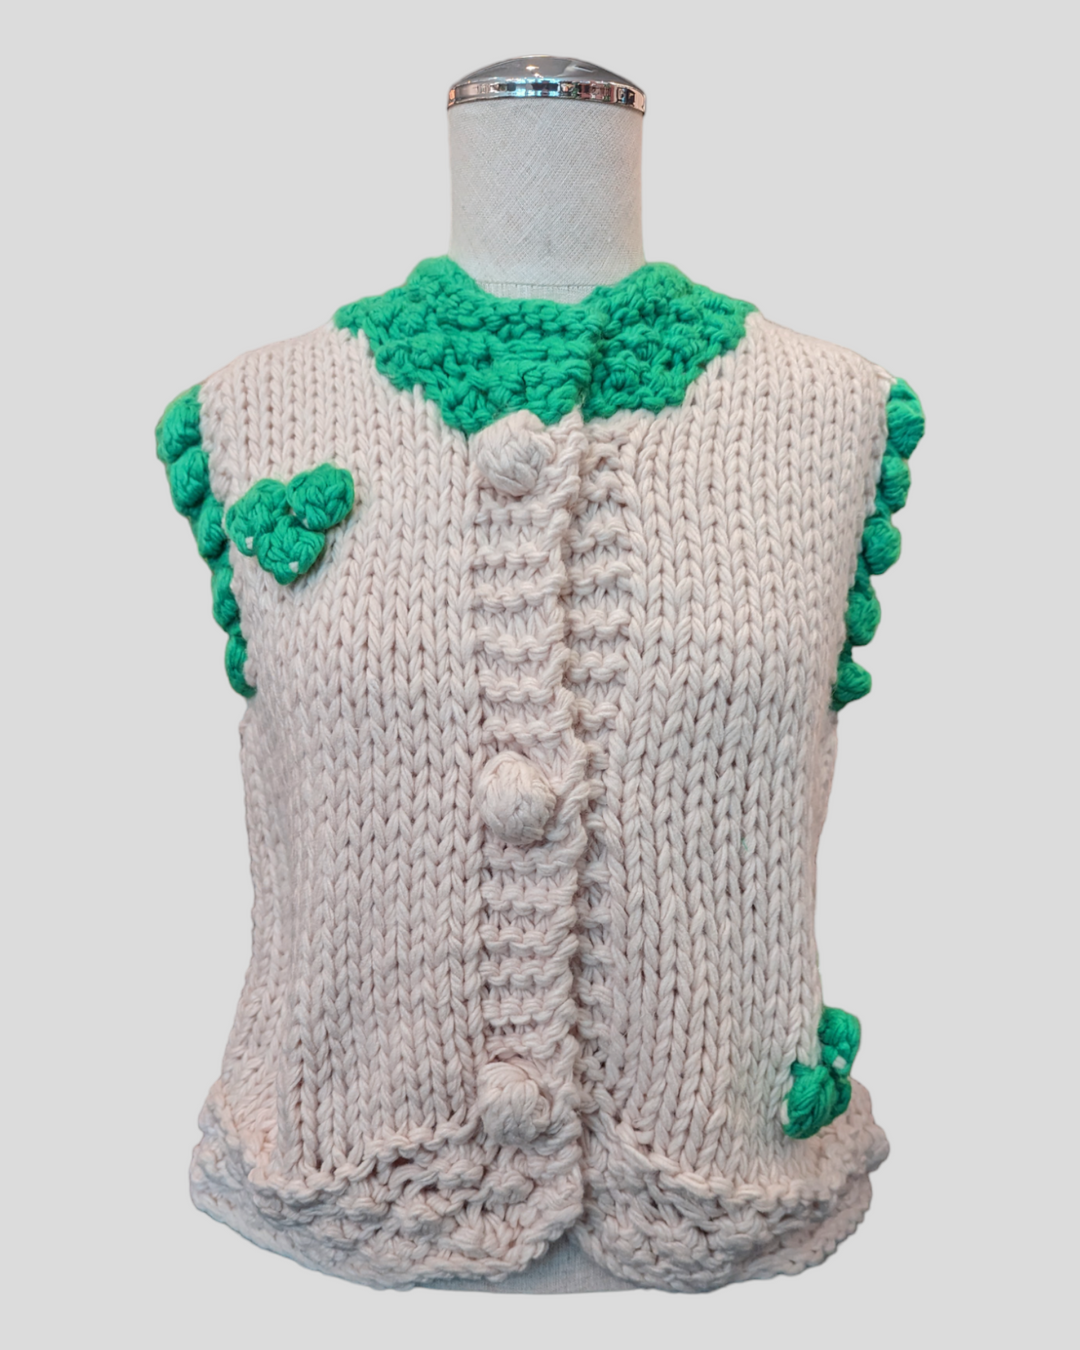 a fat open knit sweater vest in white and trimmed in green  on a mannequin